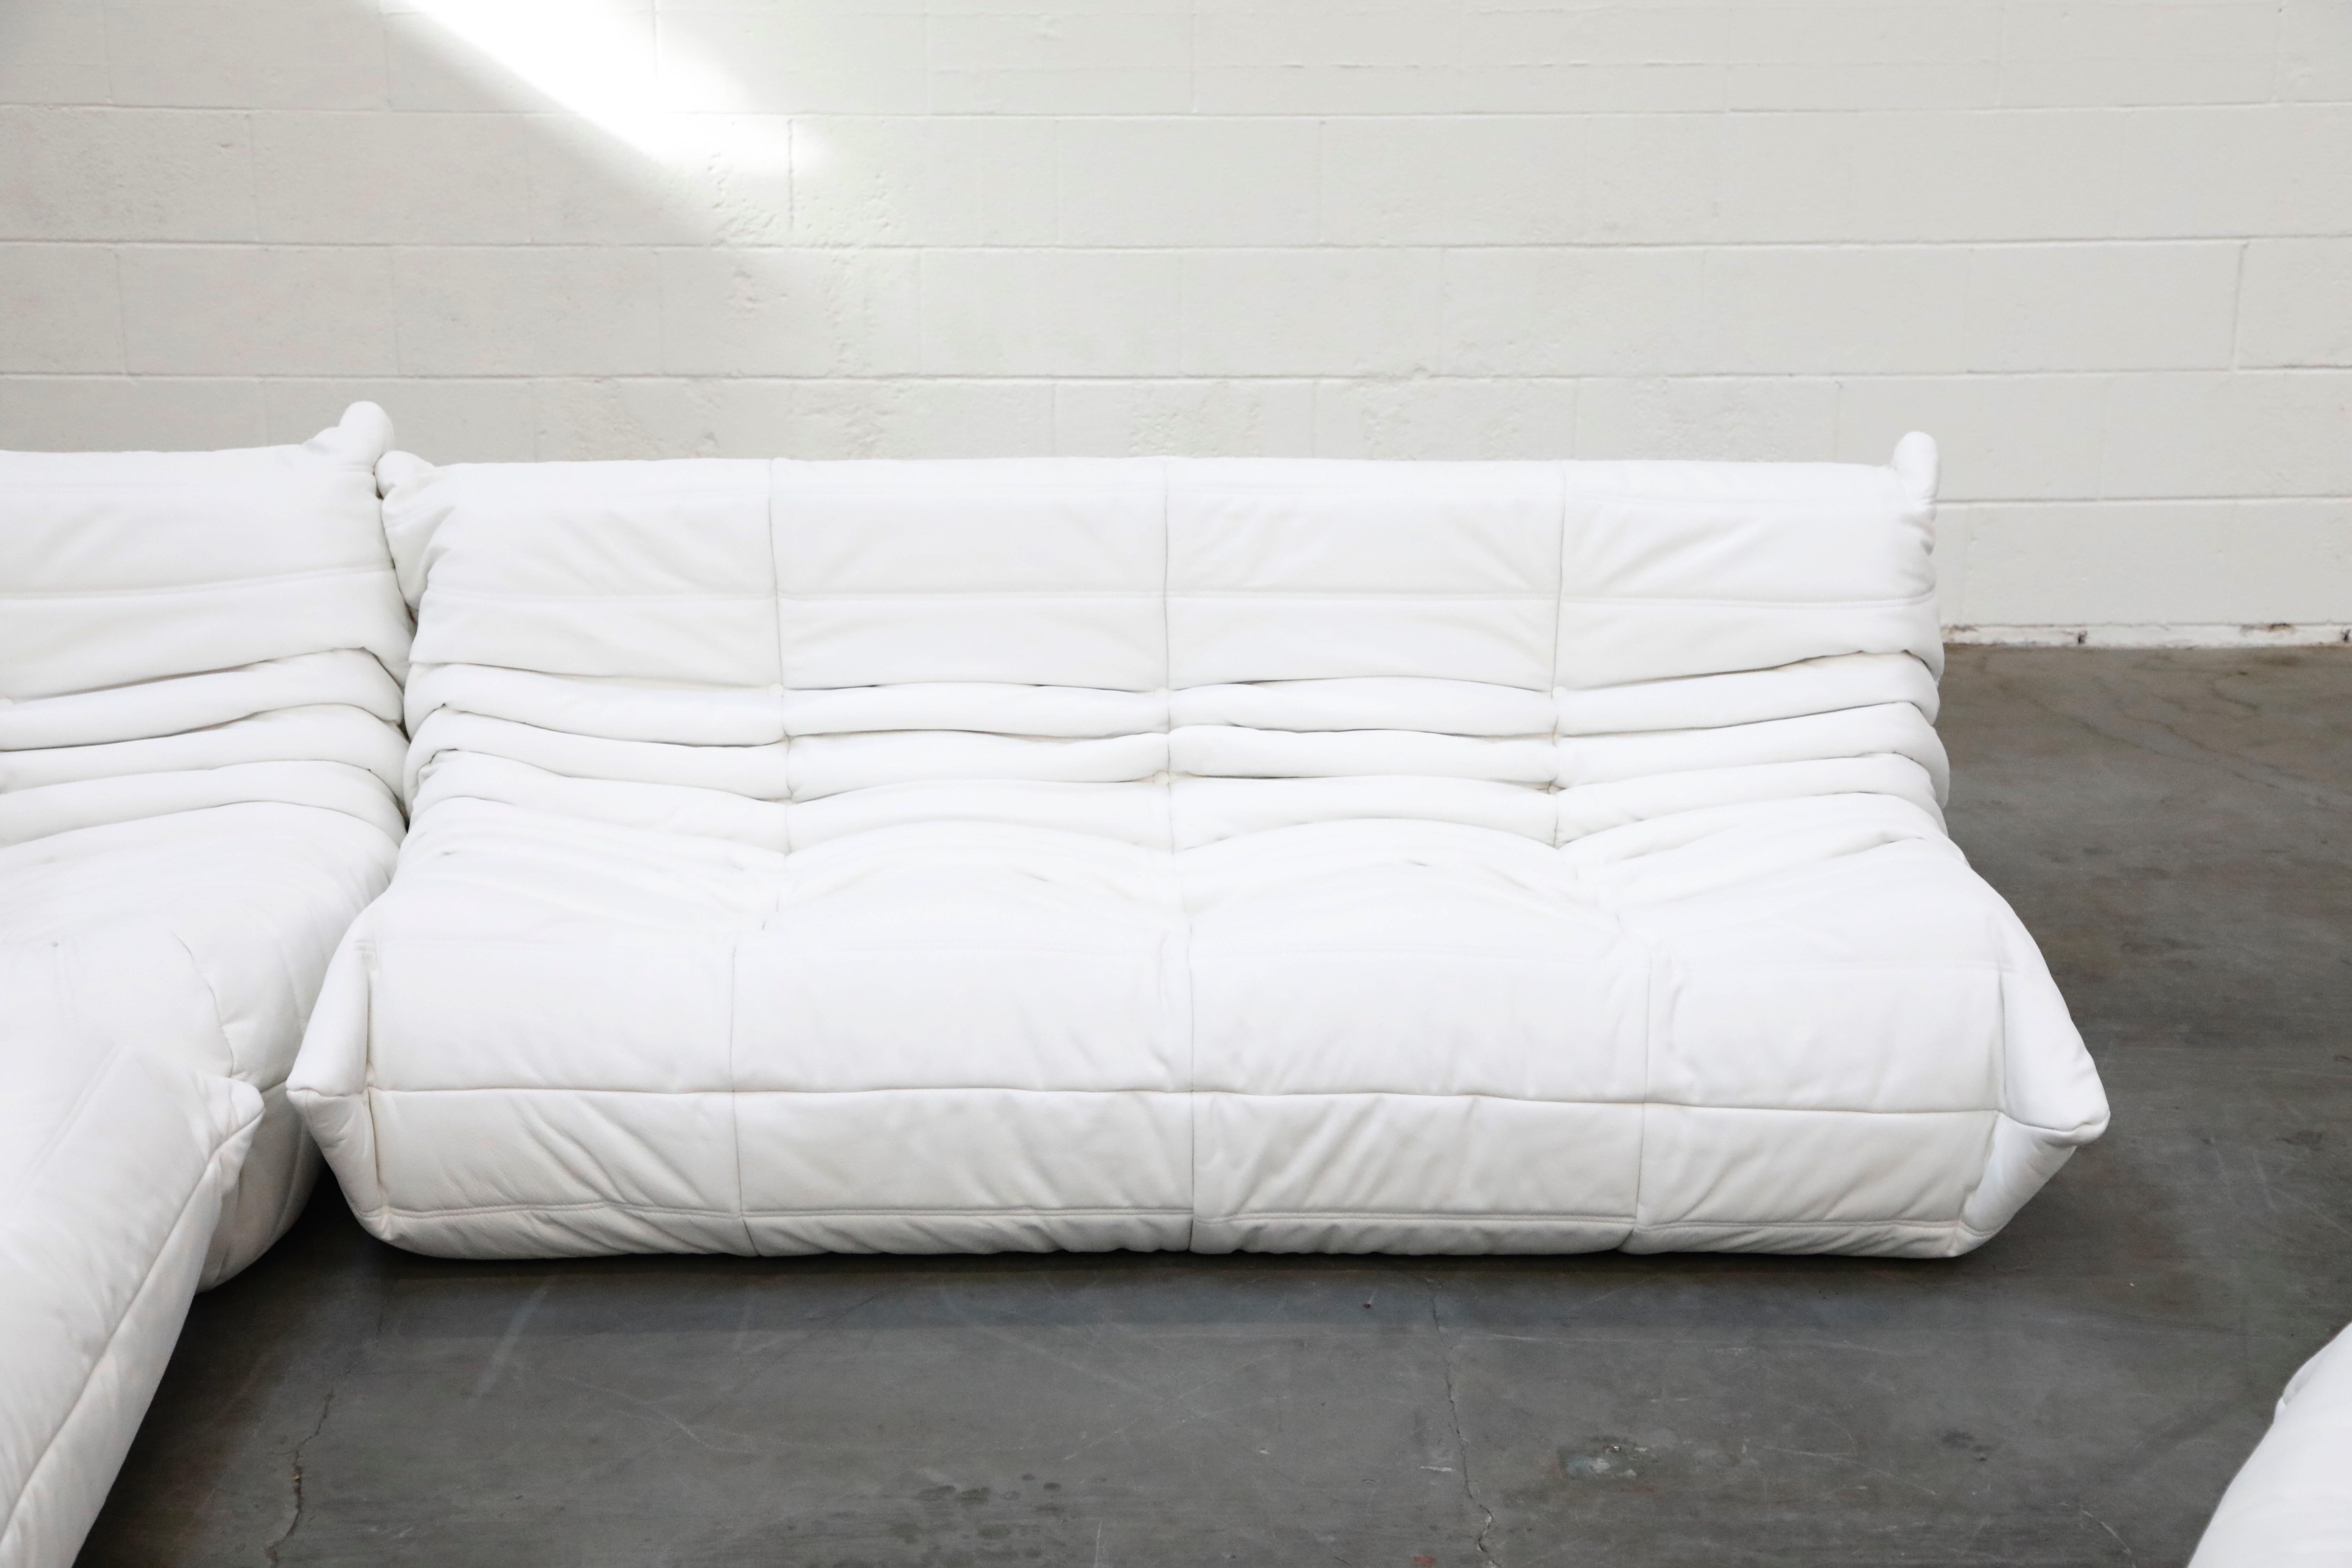 White Leather 'Togo' Three-Piece Sofa by Michel Ducaroy for Ligne Roset, Signed 1